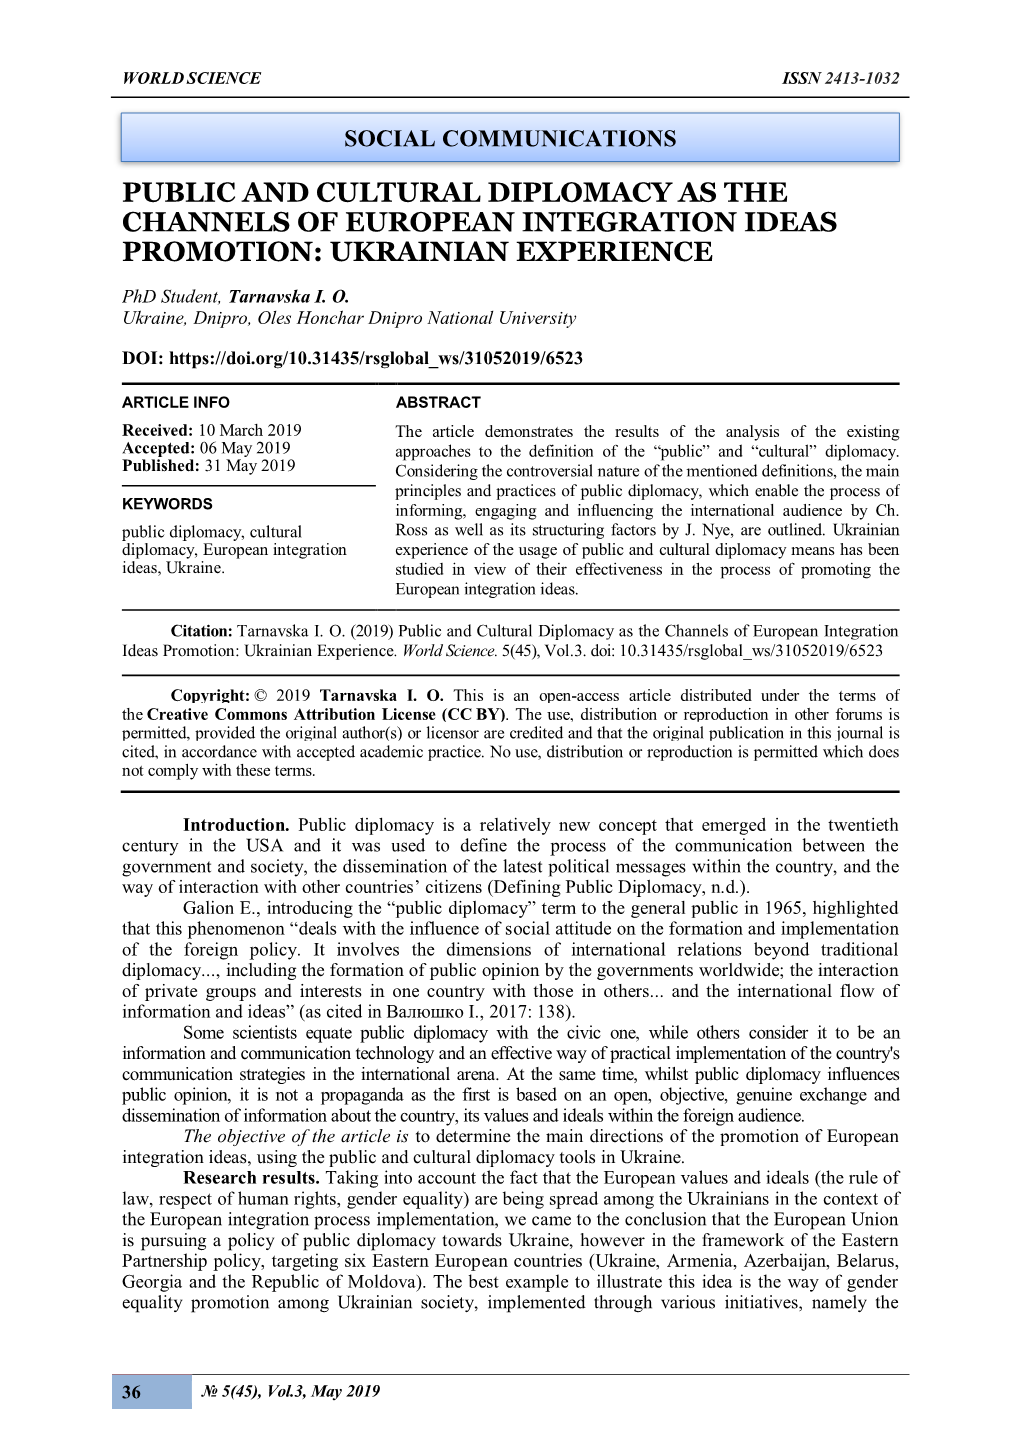 Public and Cultural Diplomacy As the Channels of European Integration Ideas Promotion: Ukrainian Experience